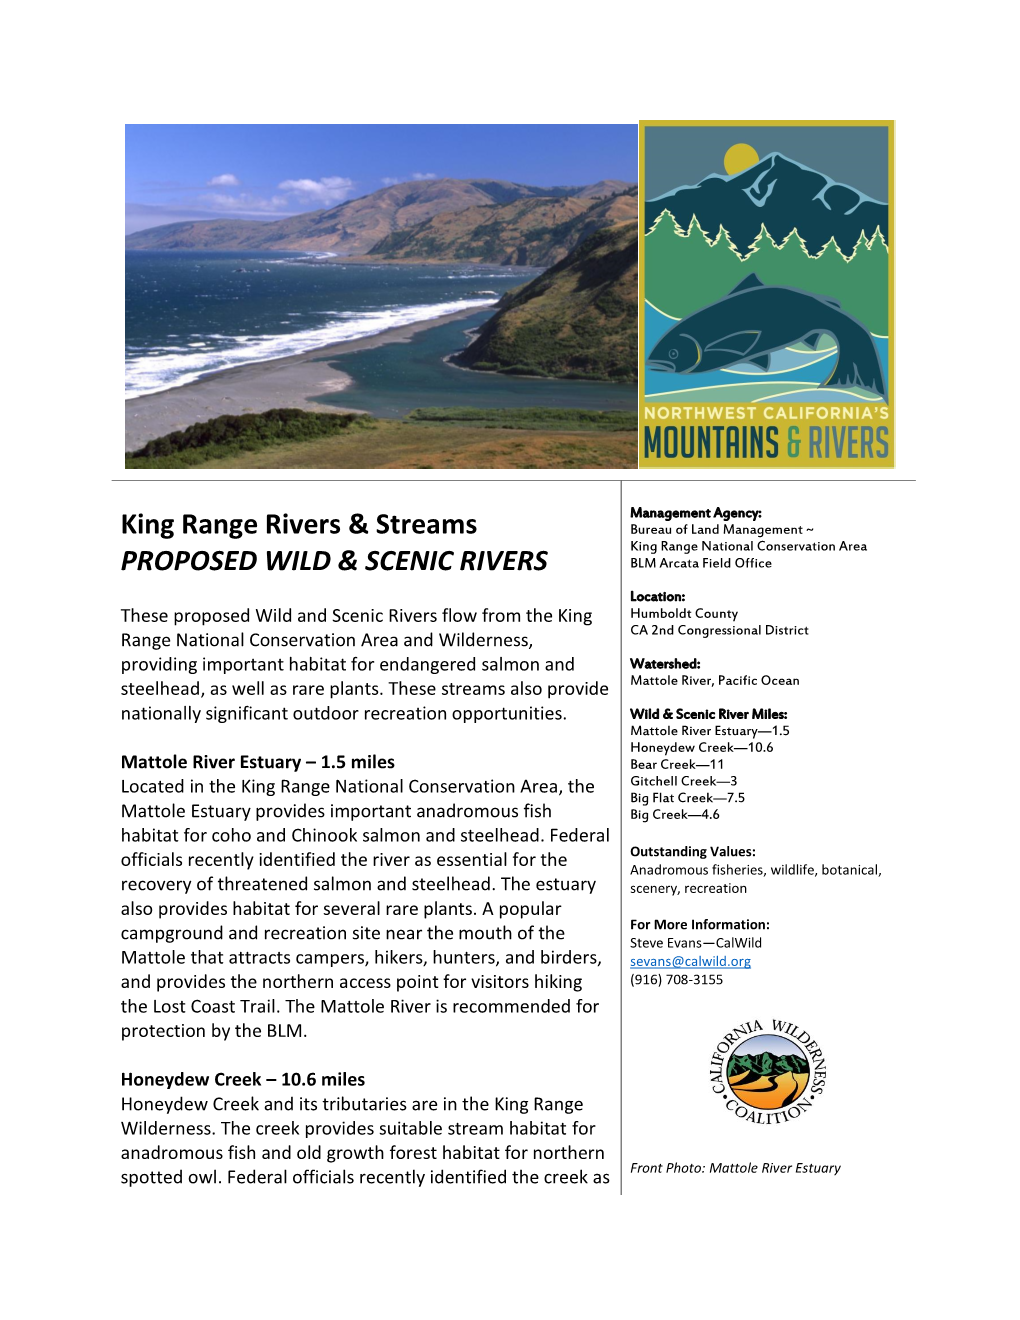 King Range Rivers & Streams PROPOSED WILD & SCENIC RIVERS